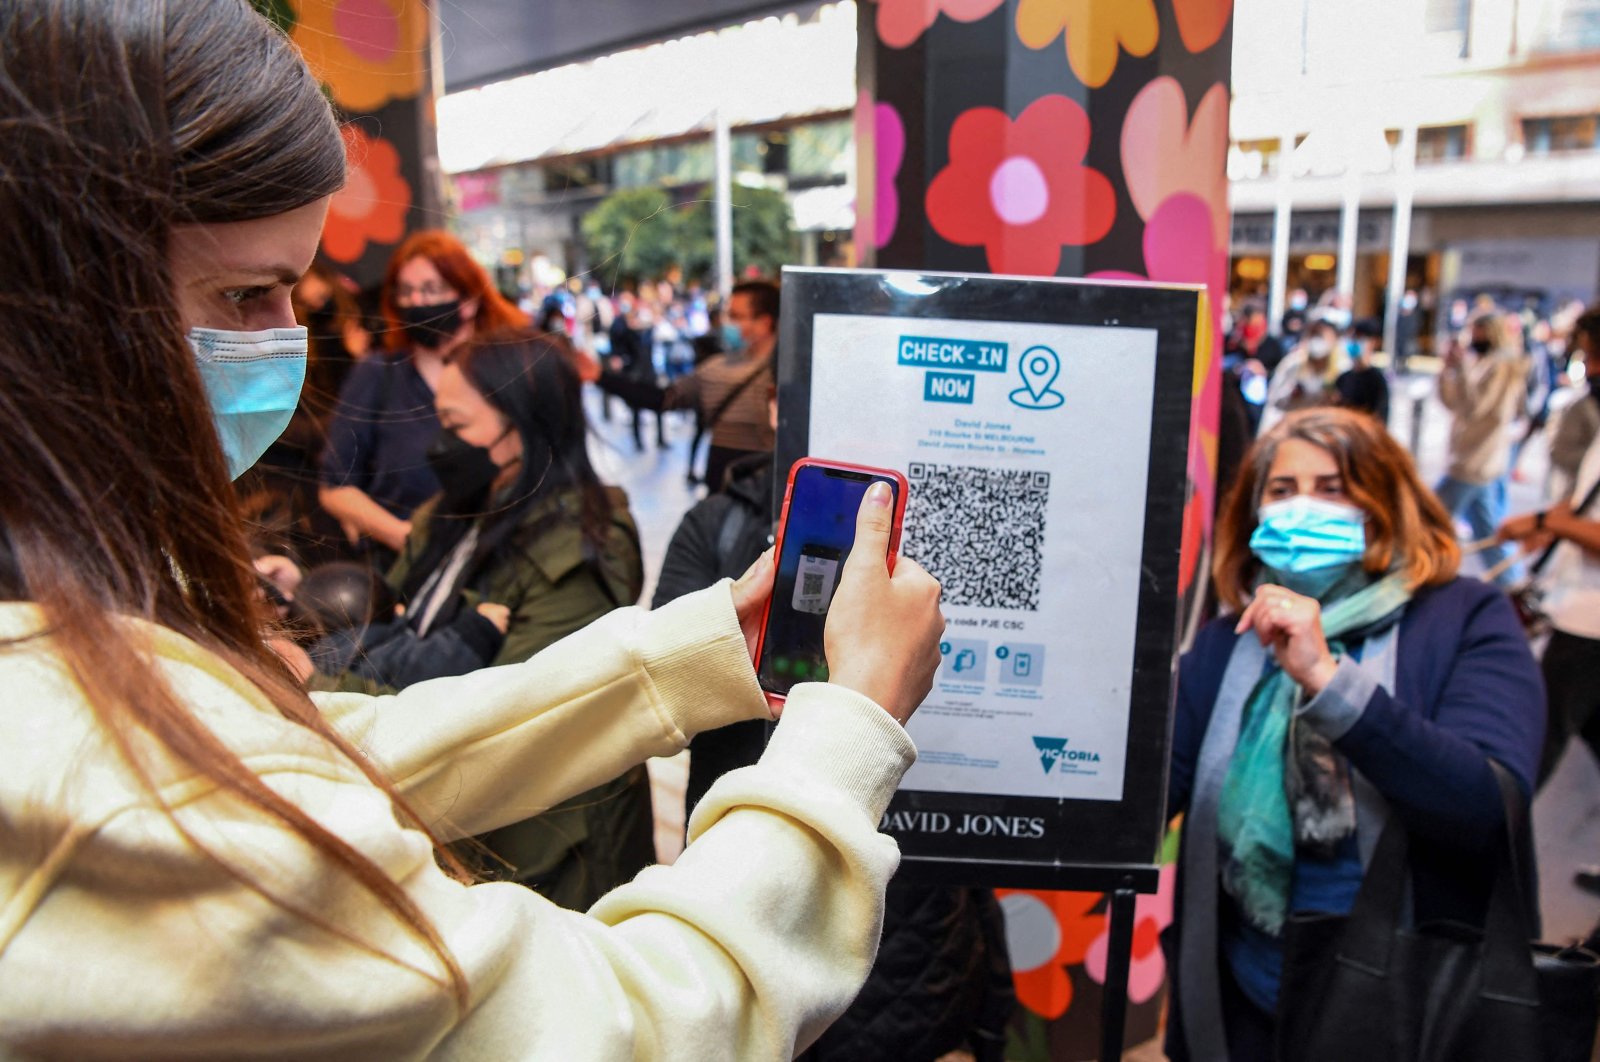 A customer scans a QR code to enter a department store in Melbourne as the city further lifts COVID-19 restrictions allowing nonessential retail shops to open and travel to the regions of Victoria after the city's sixth lockdown, Australia, Oct. 29, 2021. (AFP Photo)